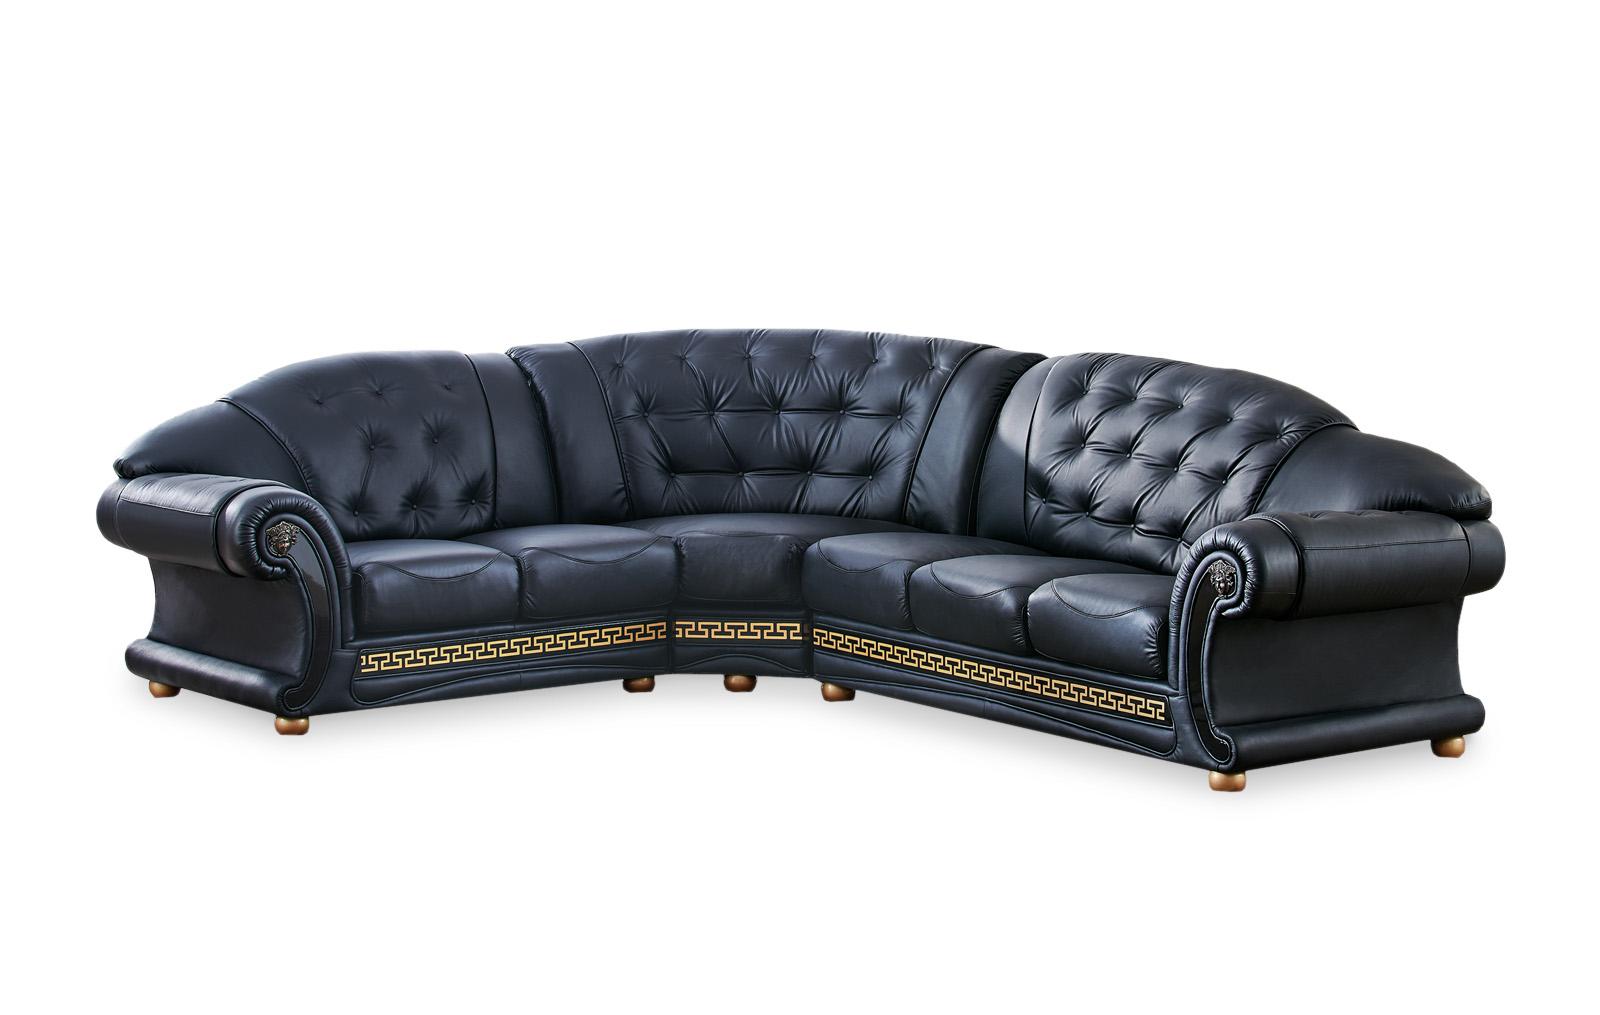 Classic Sectional Sofa Anais Anais LHC-BLACK in Black Leather